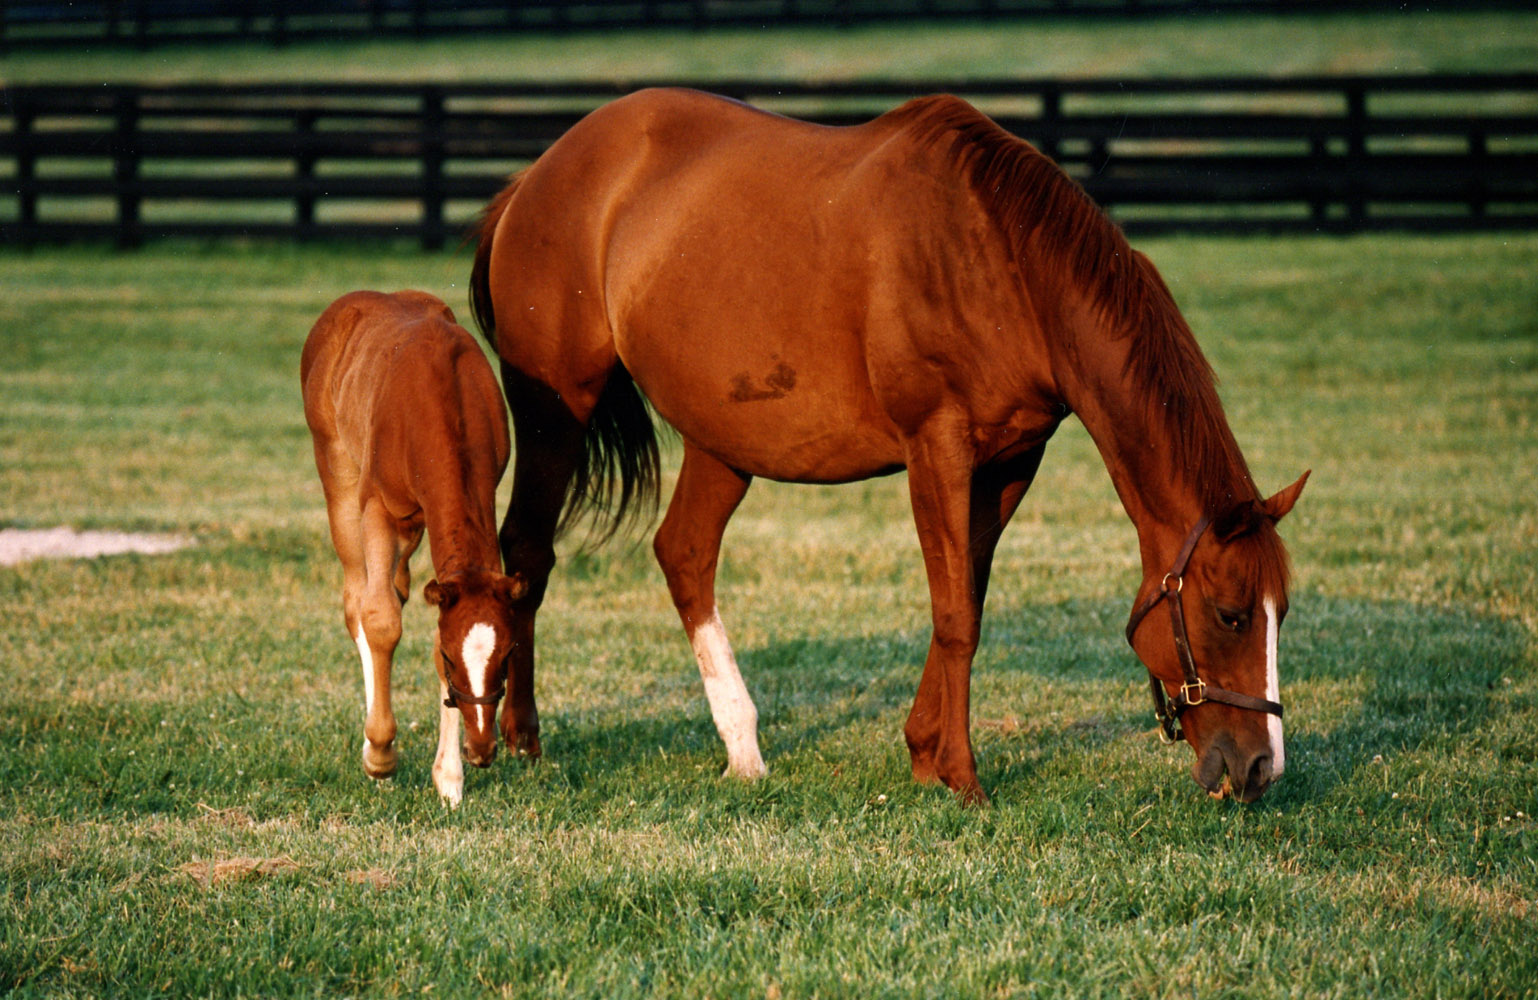 Genuine Risk with her foal at Three Chimneys Farm, June 1993 (Barbara D. Livingston/Museum Collection)